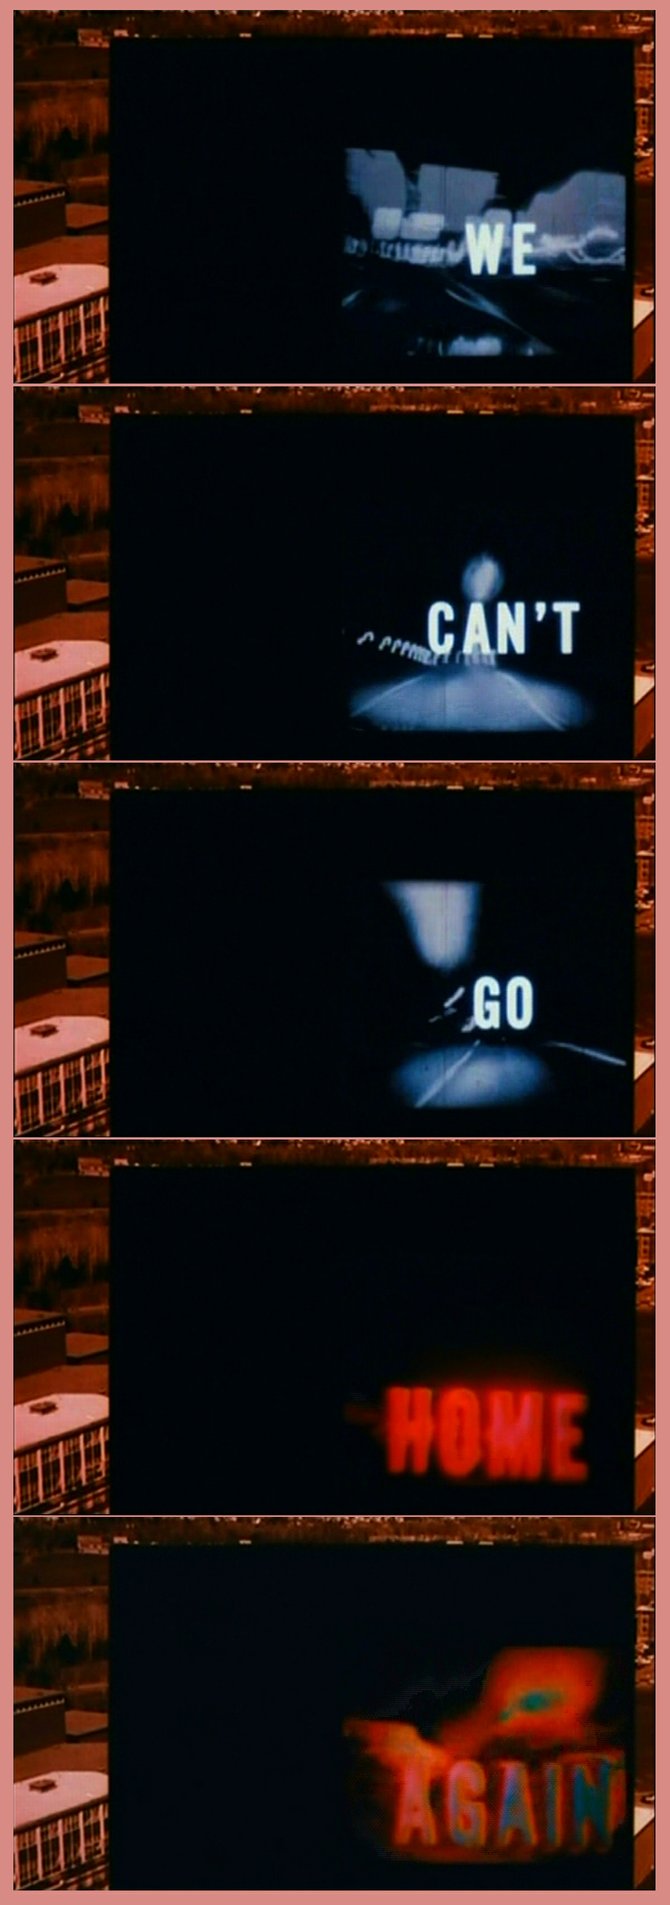 Nicholas Ray's "We Can't Go Home Again" (1976).